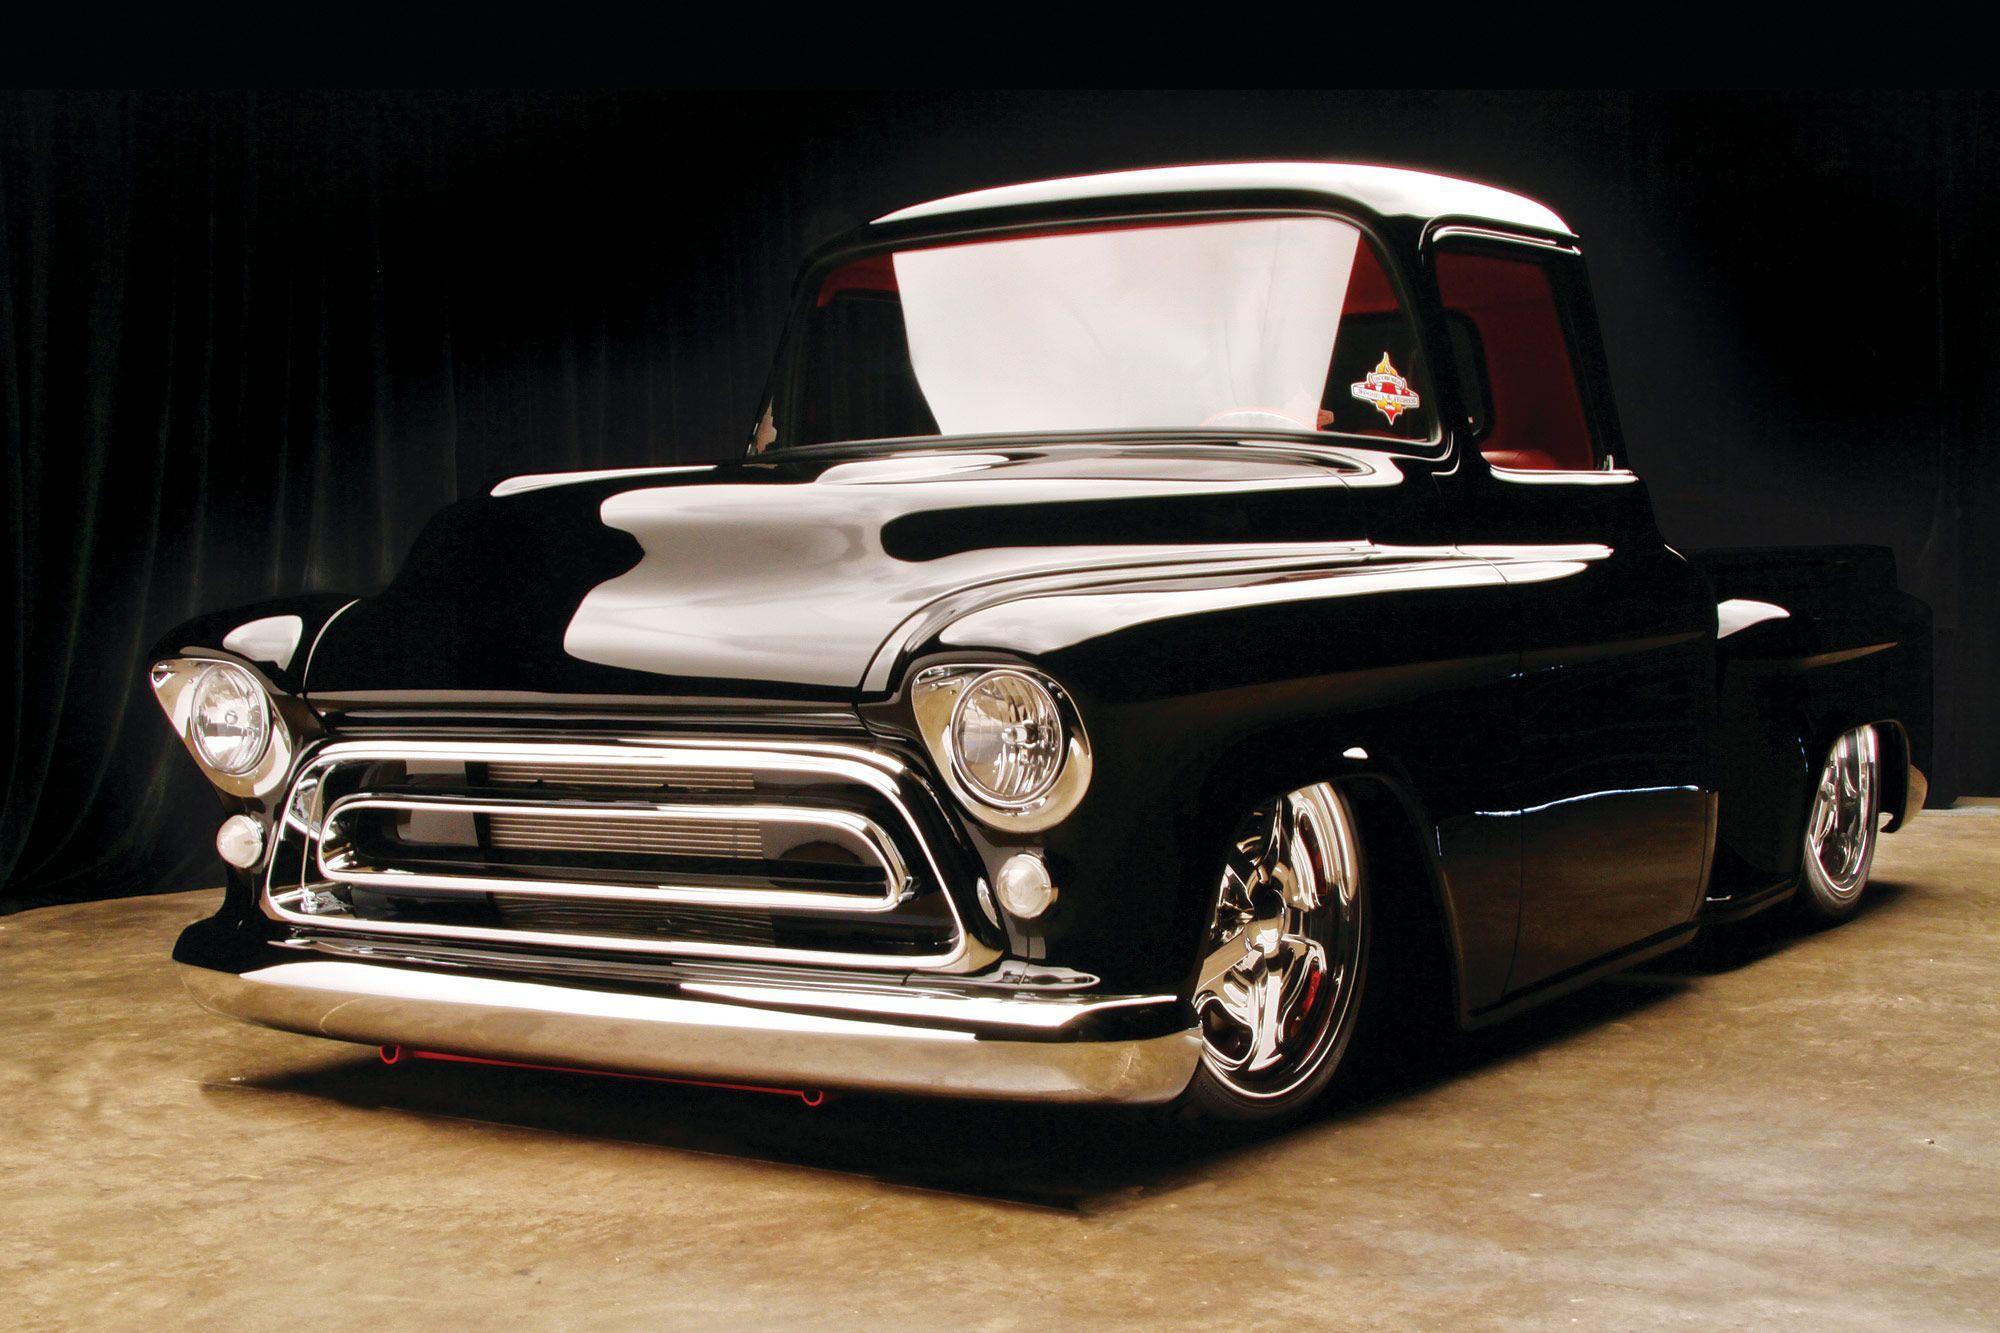 Classic Chevy Truck Wallpapers Top Free Classic Chevy Truck Backgrounds Wallpaperaccess